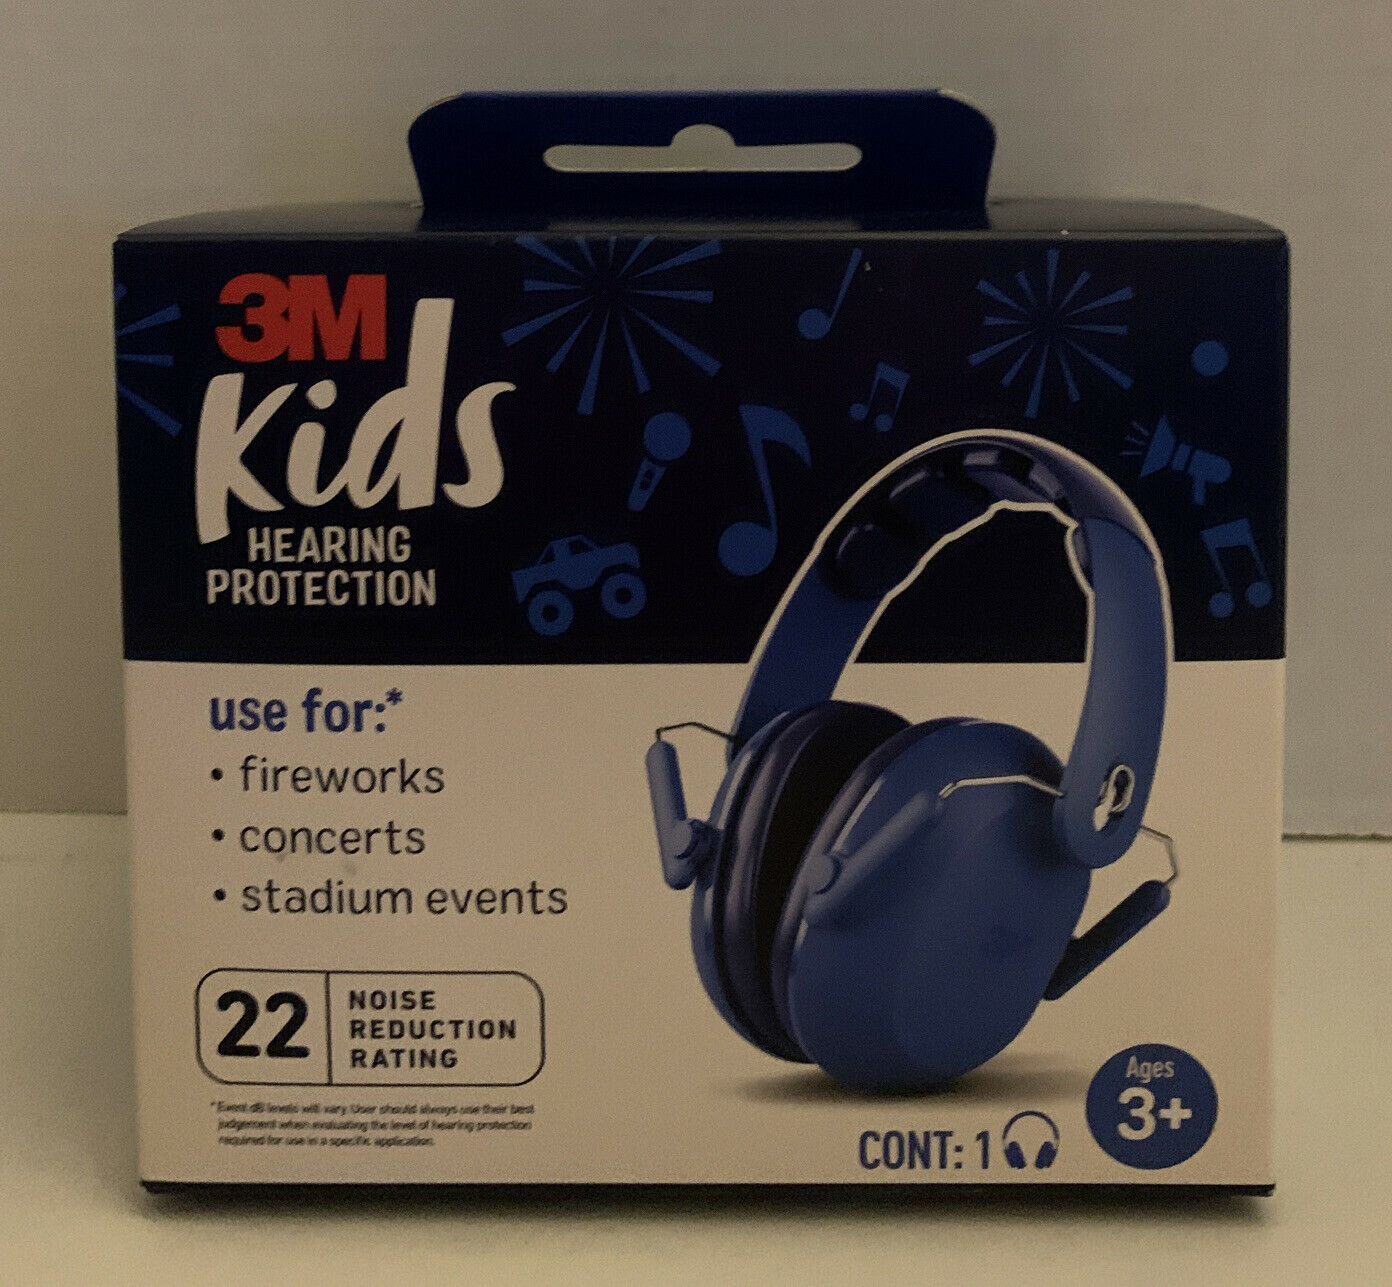 NEW 3M Kids 22 dB Noise Reduction Premium Hearing Protection Ear Muffs Ages 3+